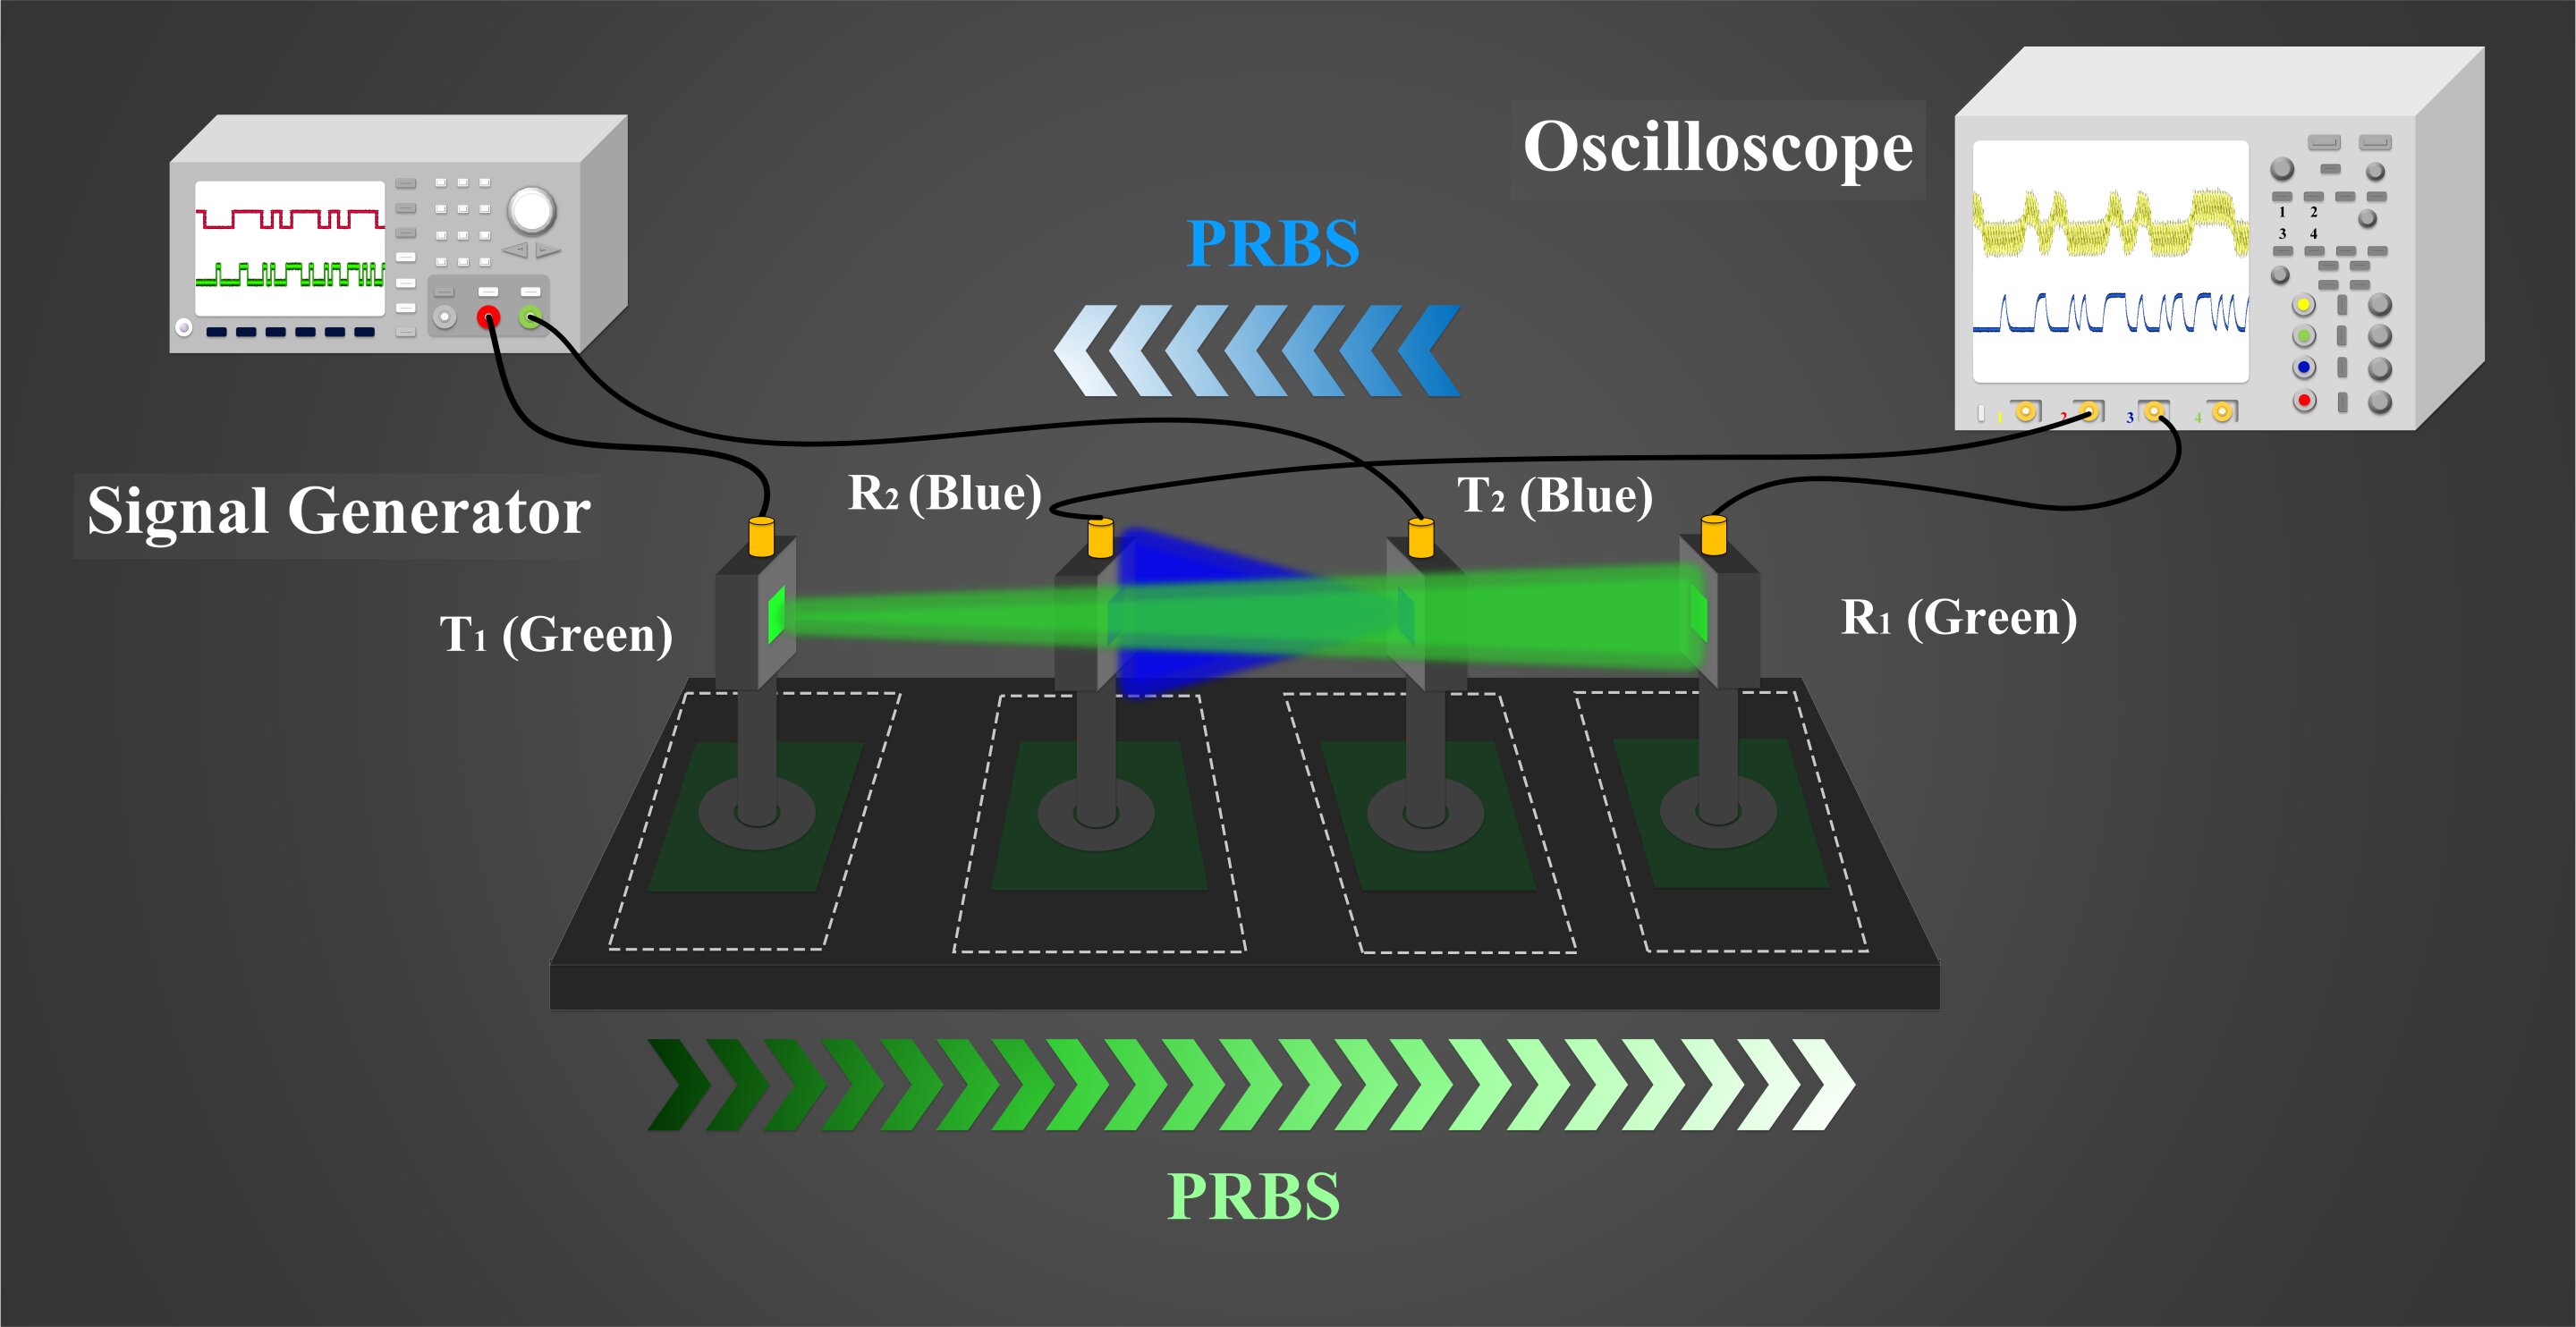 New multi-channel visible light communication system uses single optical path